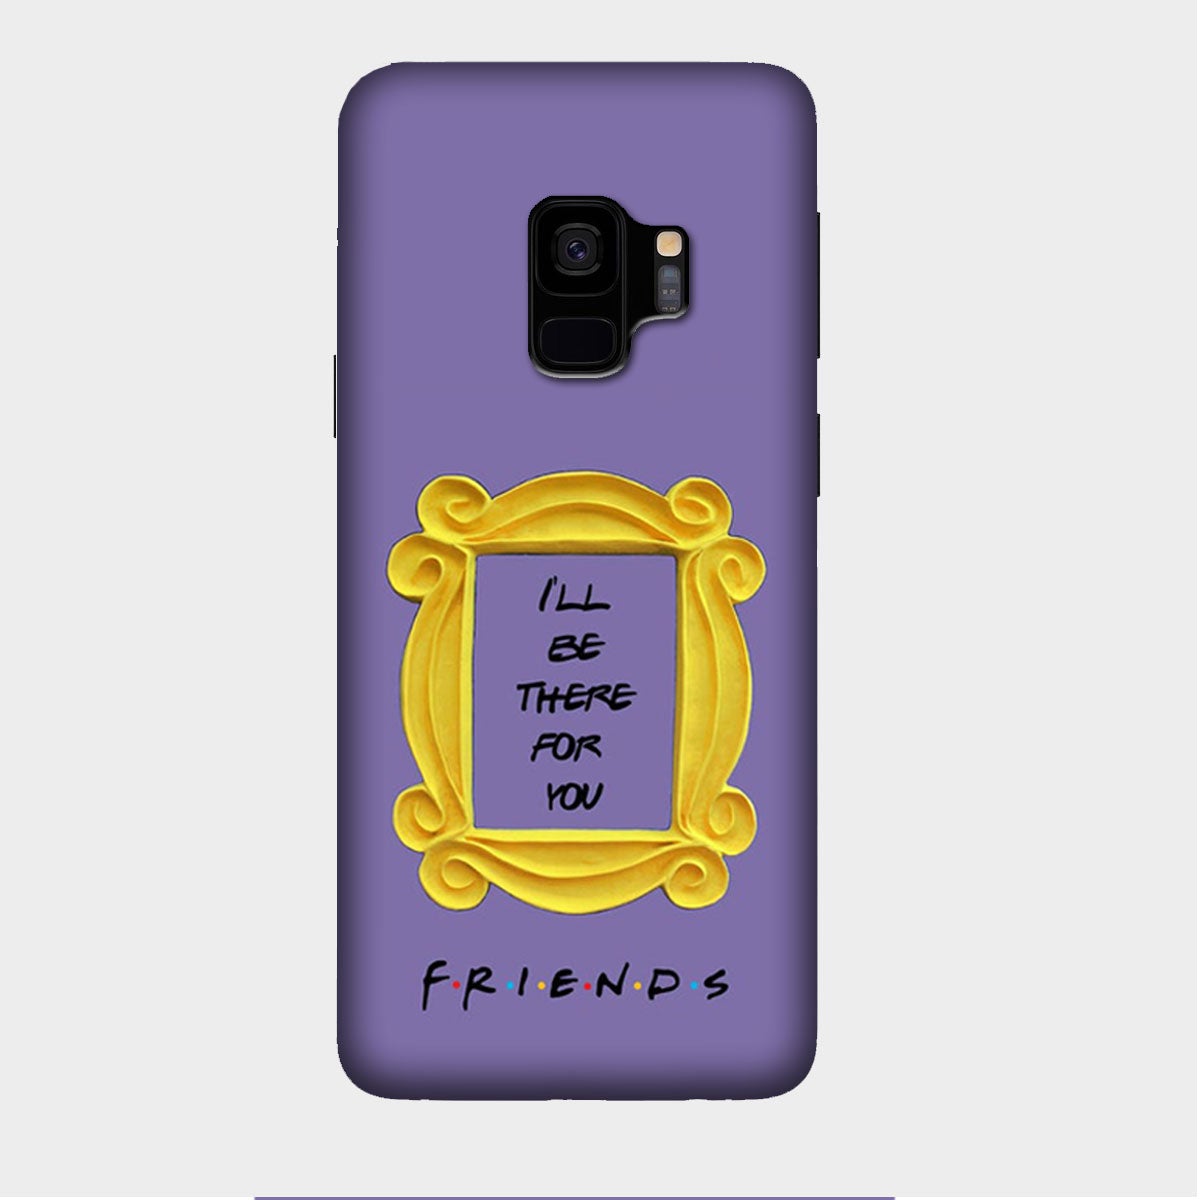 Friends - Frame - I'll be There for You - Mobile Phone Cover - Hard Case - Samsung - Samsung